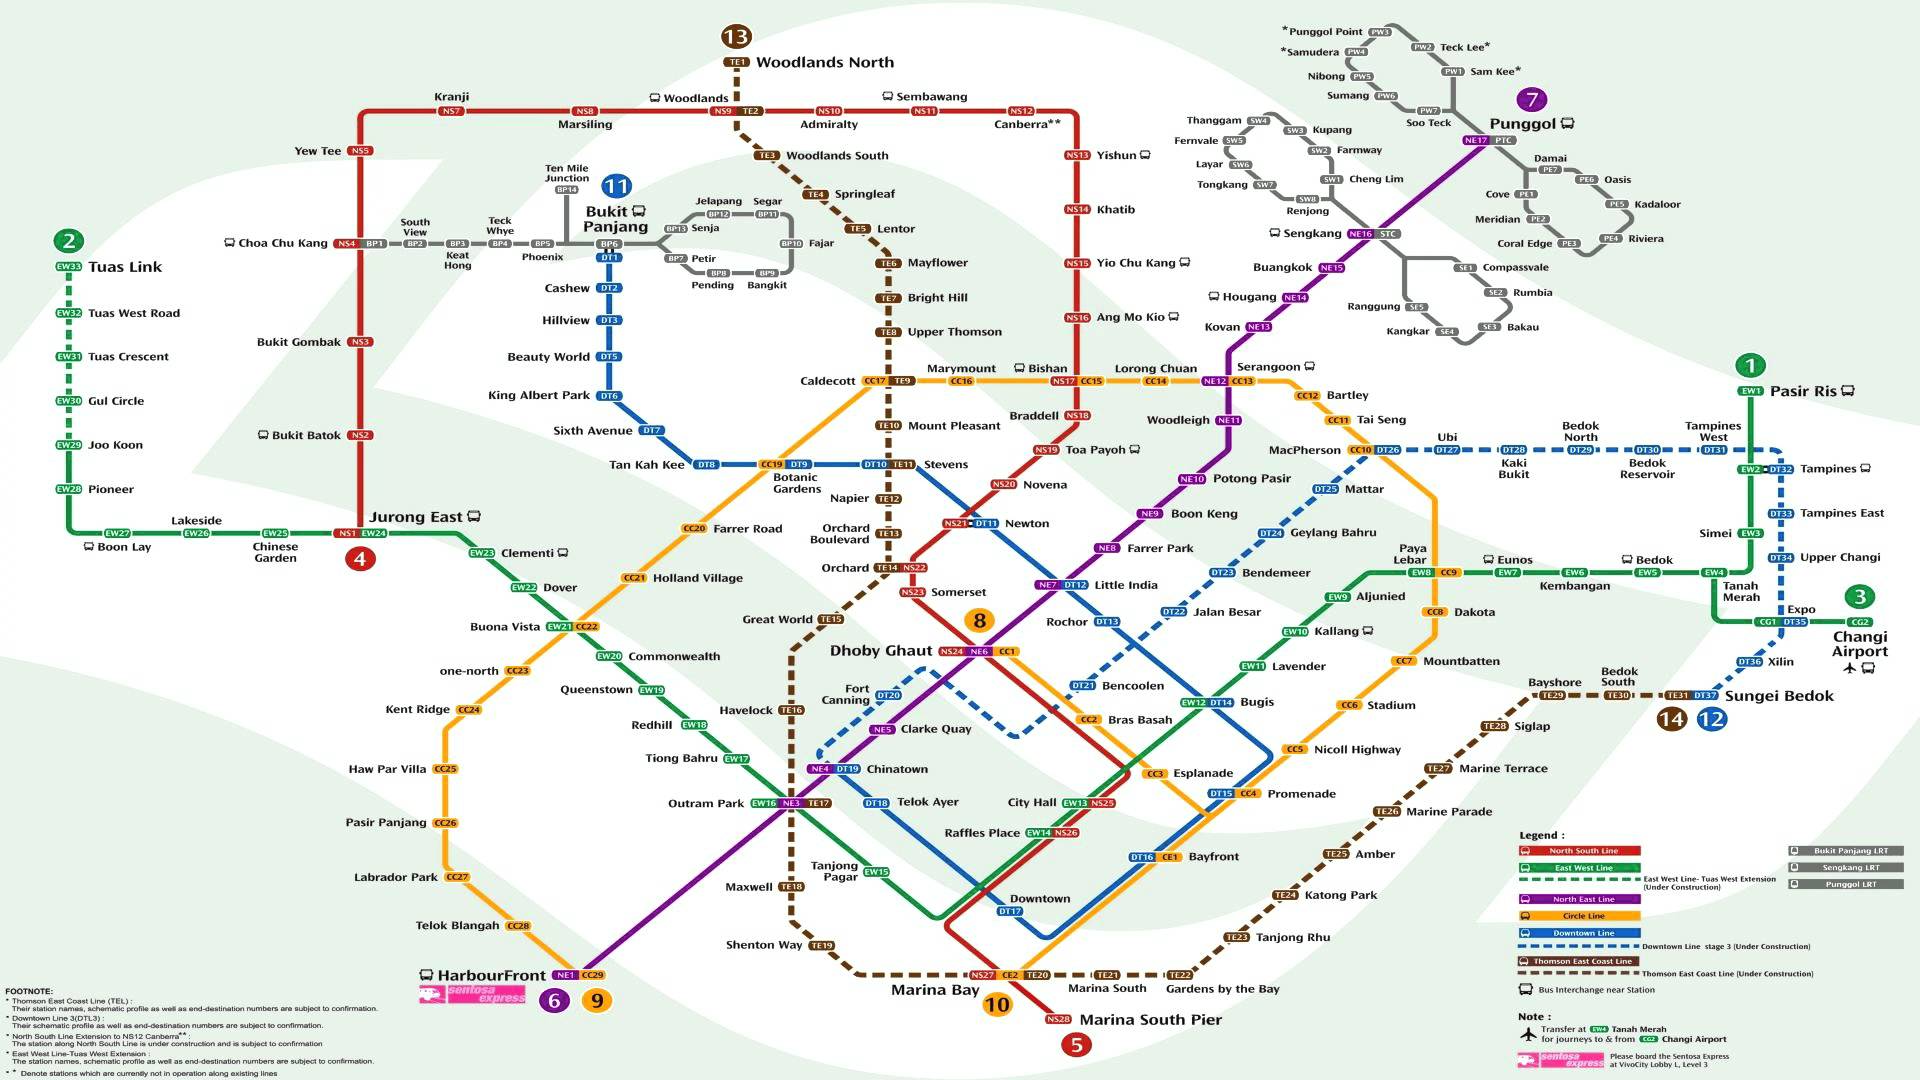 Singapore mrt map 2017 | 2018 Printable calendars posters images ...